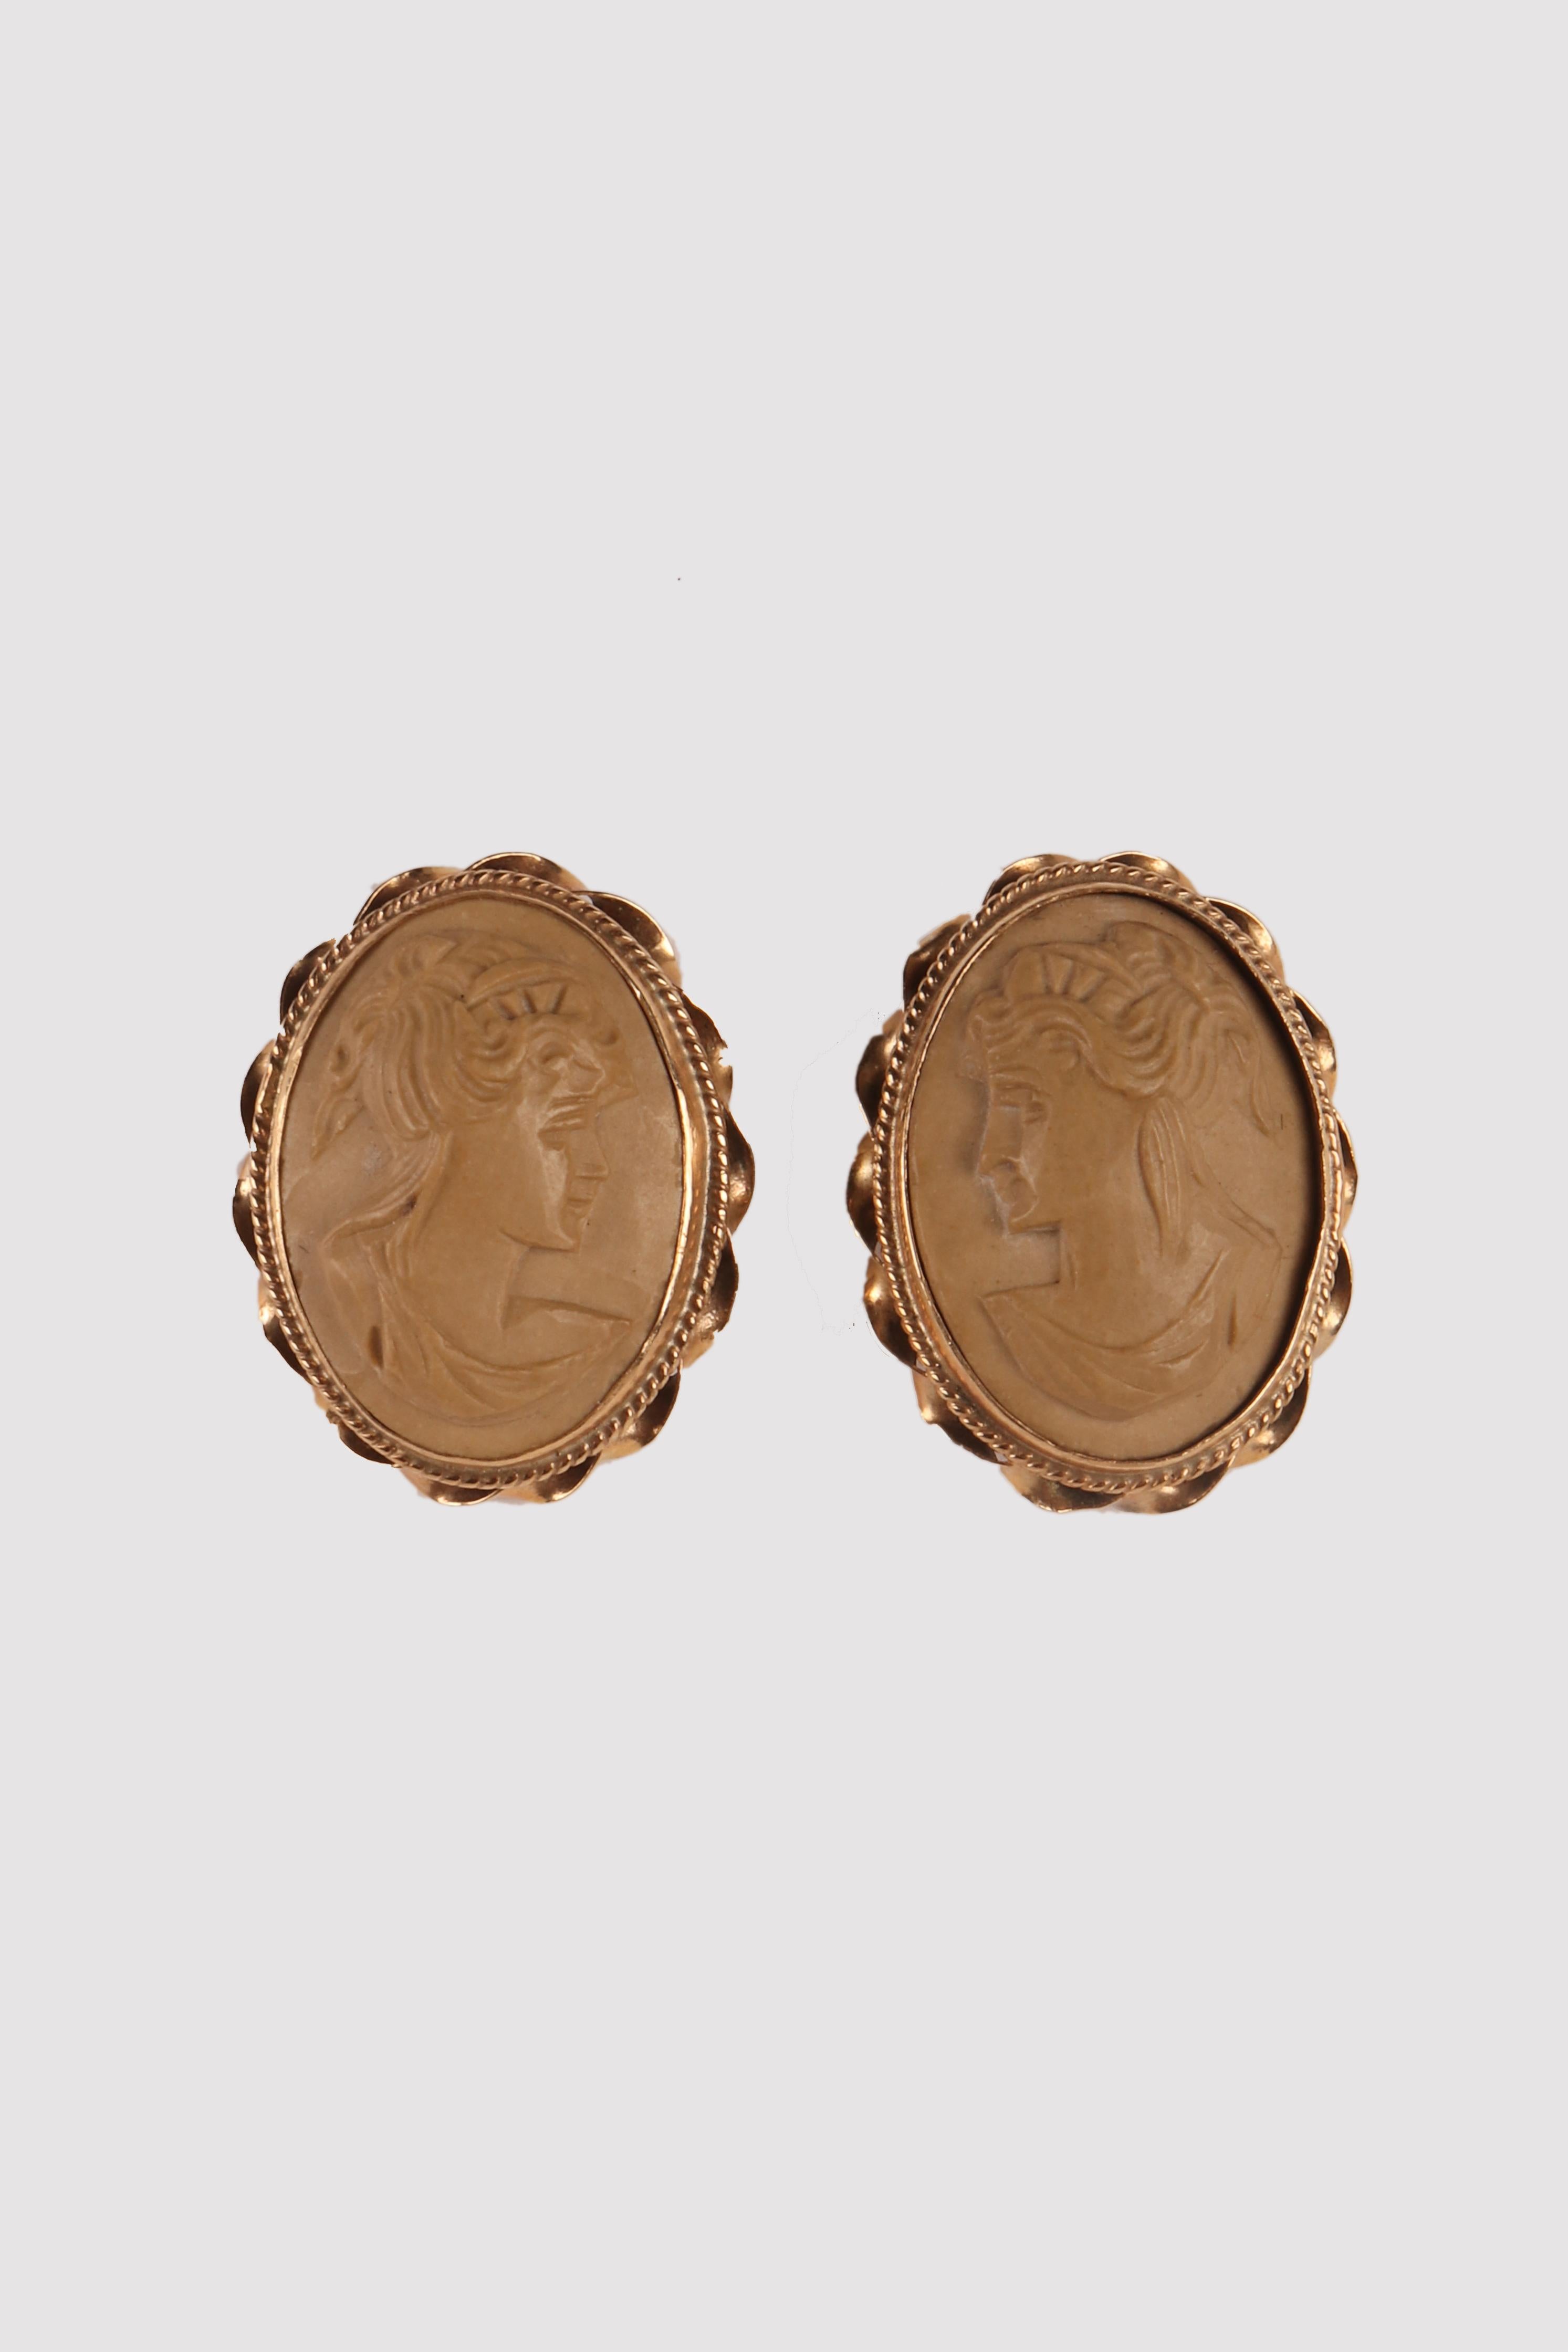 Gold and lava earrings. The oval cameos, sculpted in light lava, depict two profile busts of young women with classic hairstyles on a smooth background.
The 14 kt gold setting features a smooth vertical bezel, decorated with a filigree ring and then